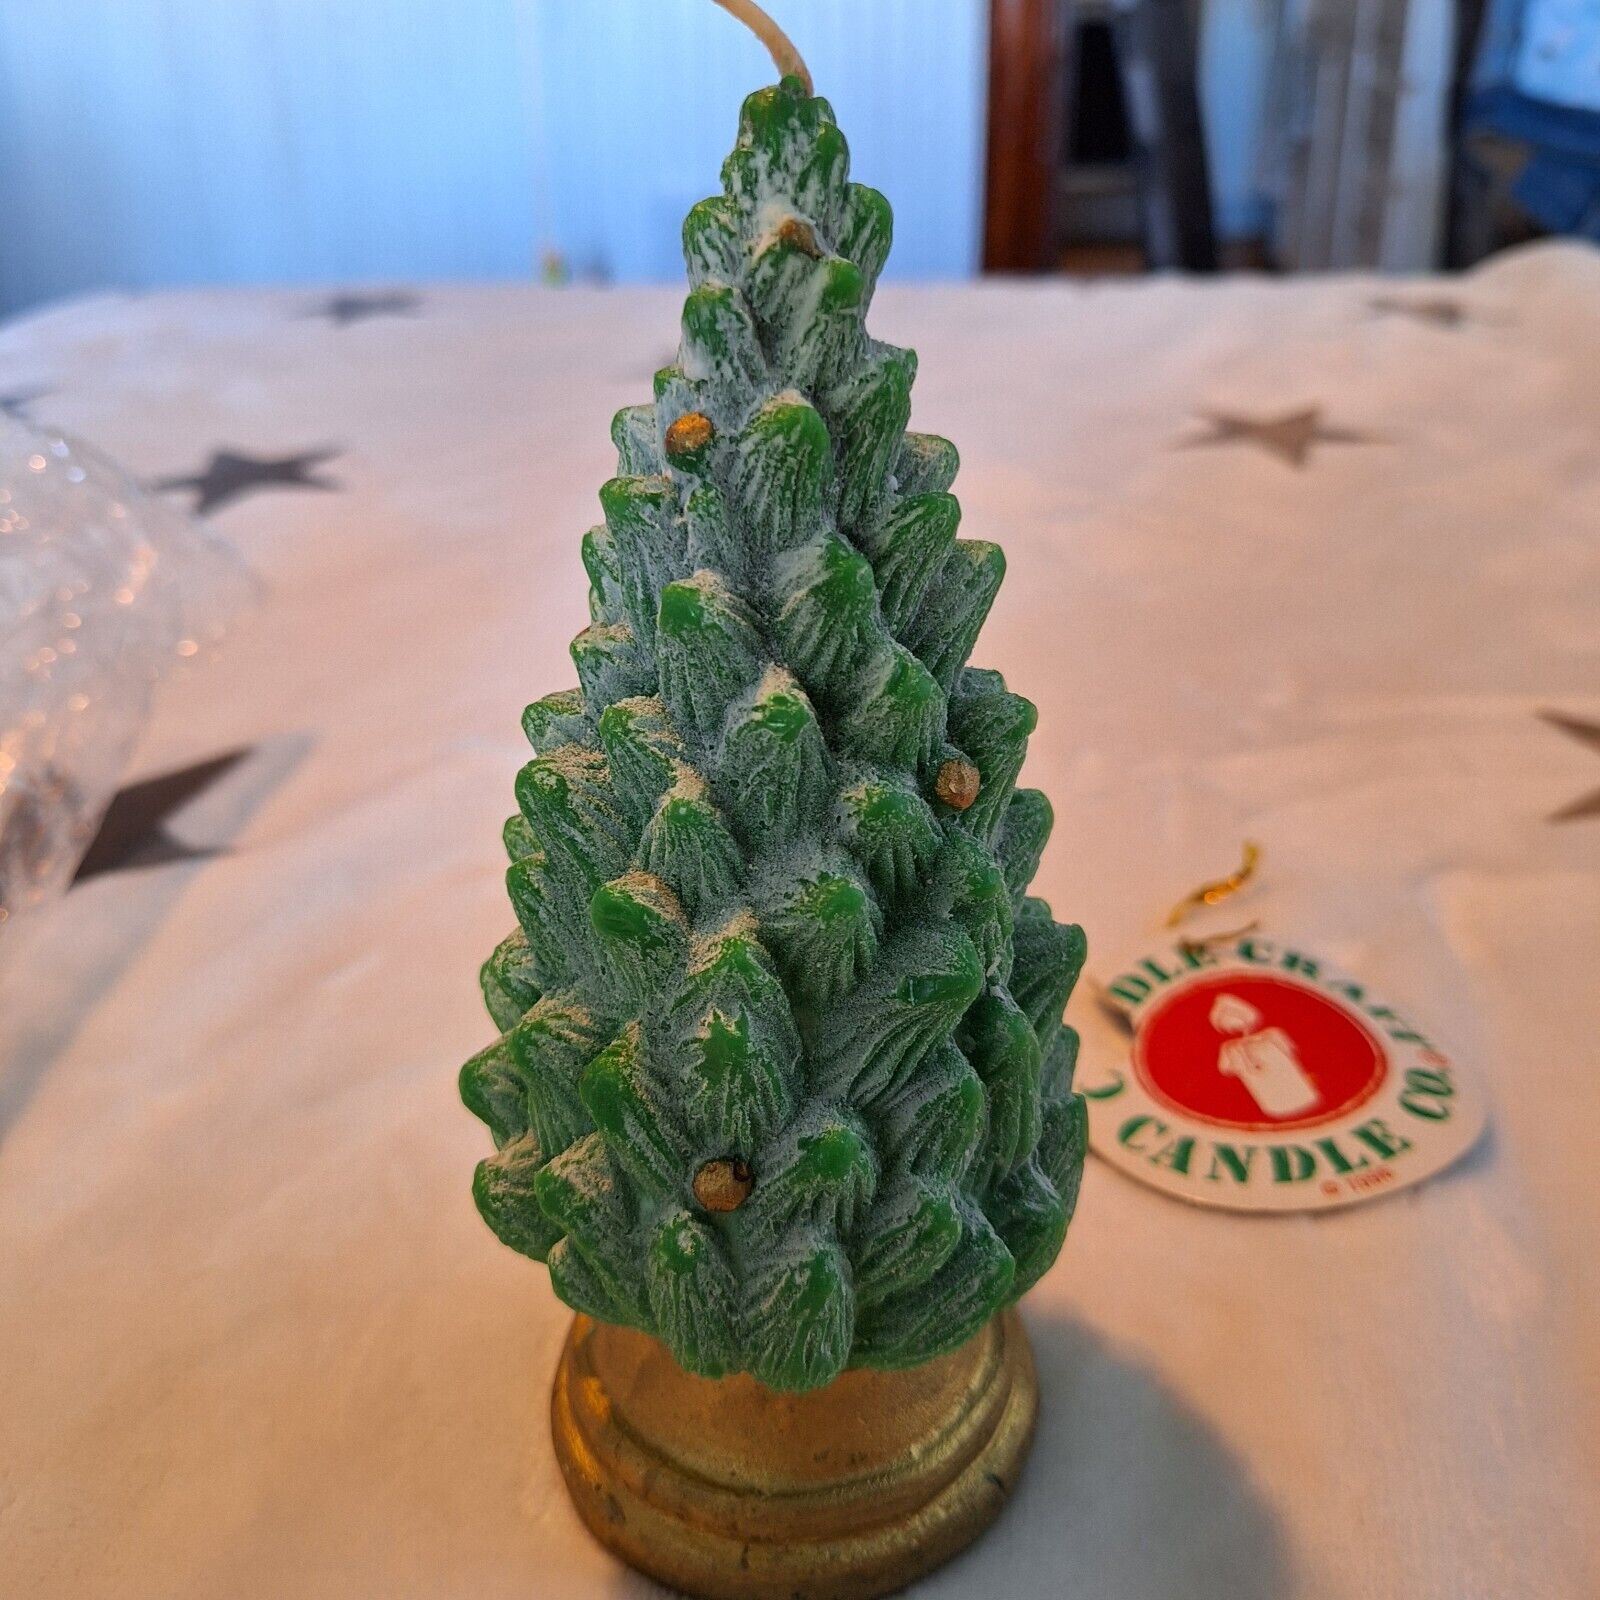 Vintage 1996 Candle Craft Christmas Tree Shaped Candle Never Burned With Tag